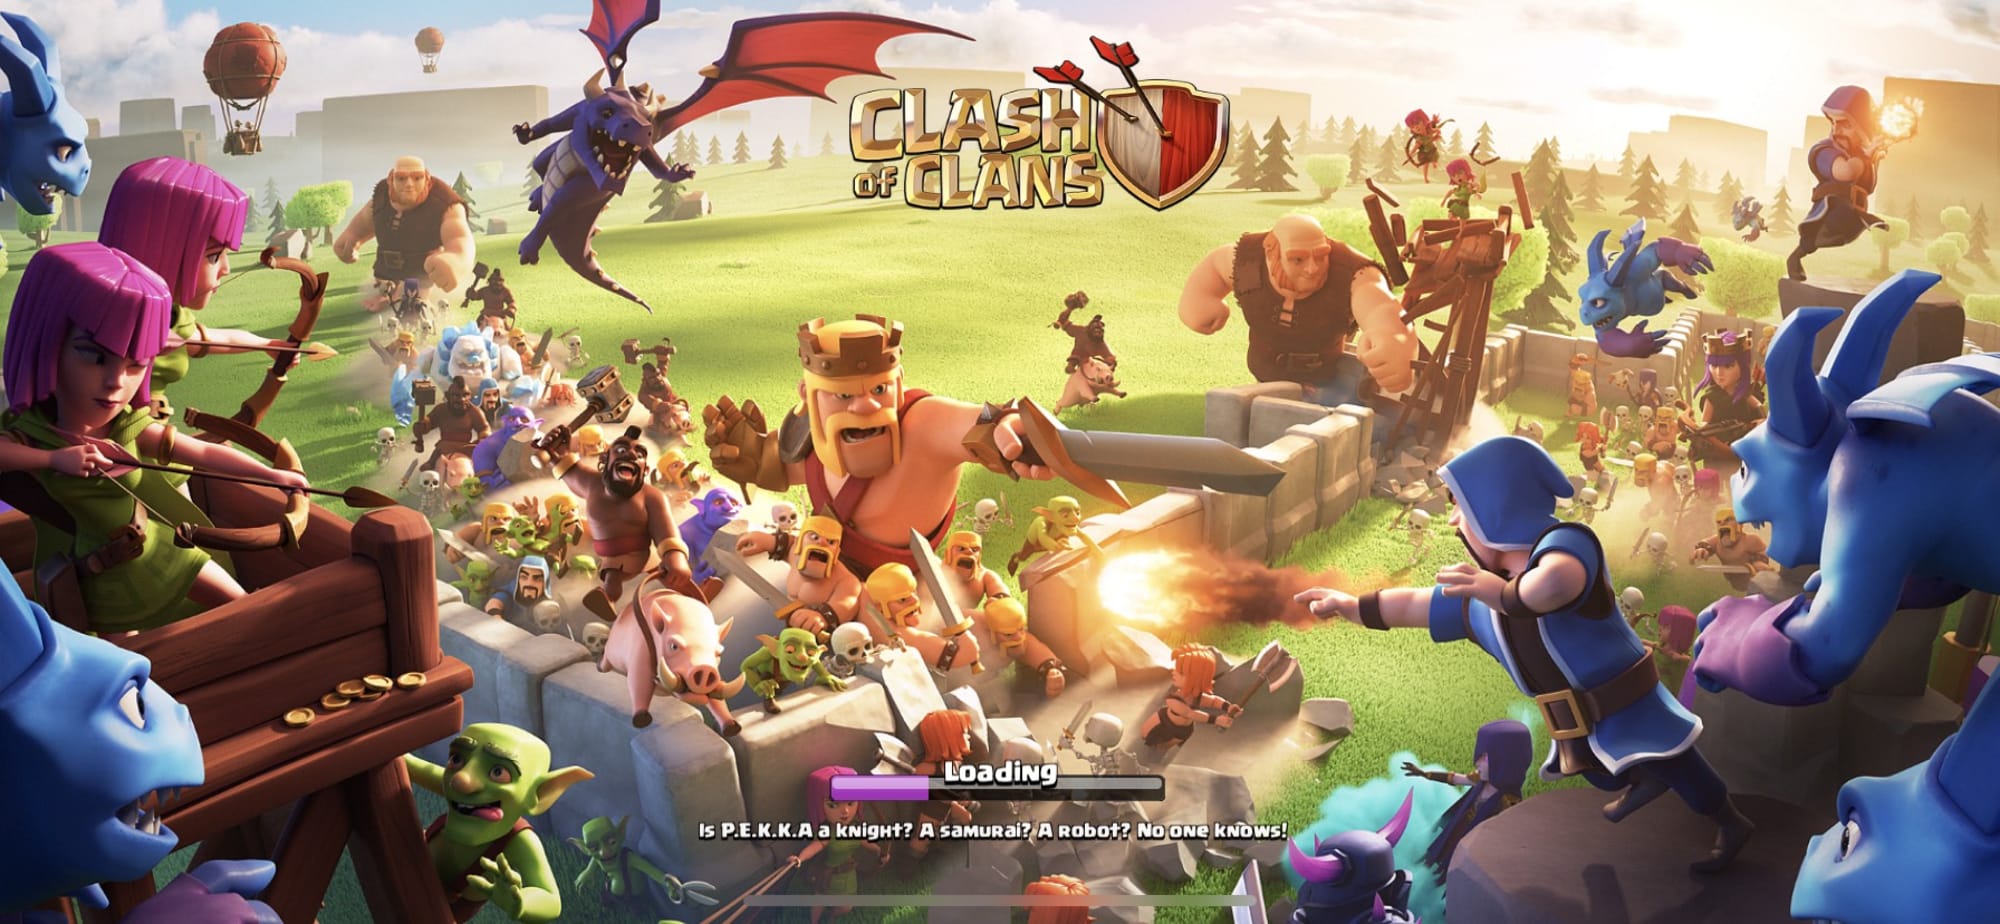 Clash of Clans: Town Hall 14 and Hero's Pet leaked for Spring 2021 update